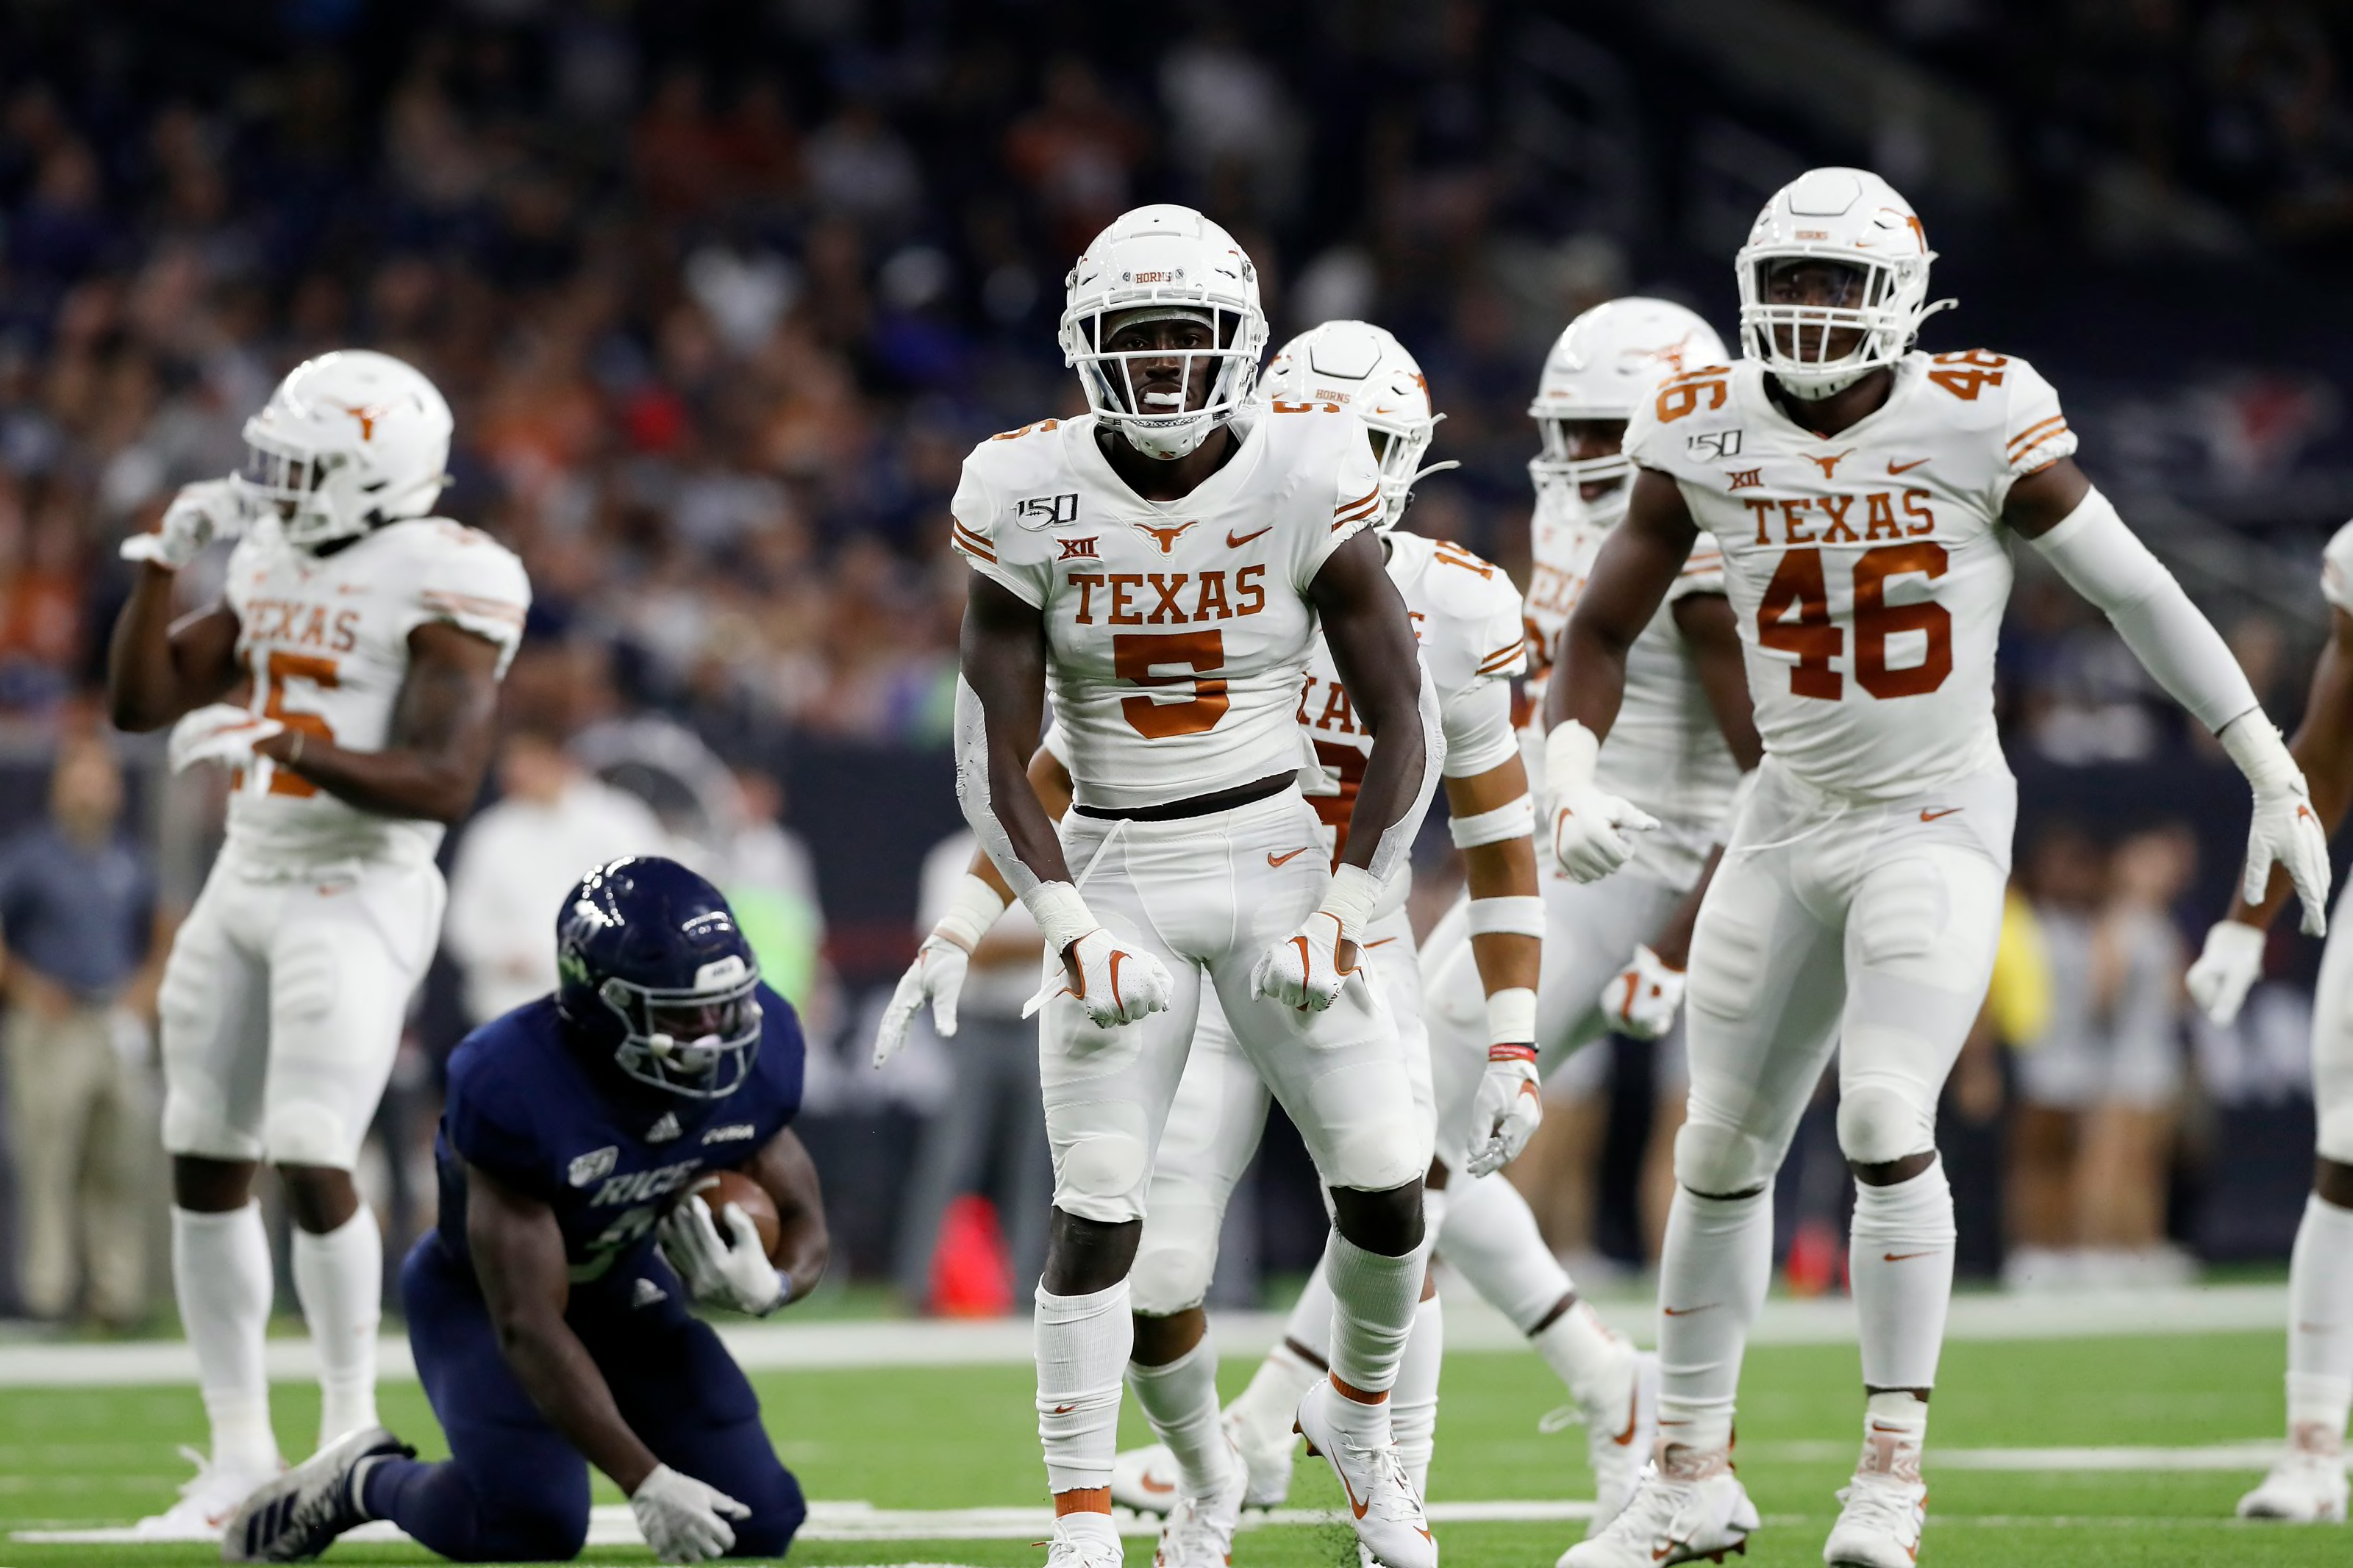 Texas Football 3 players who will household names in 2020